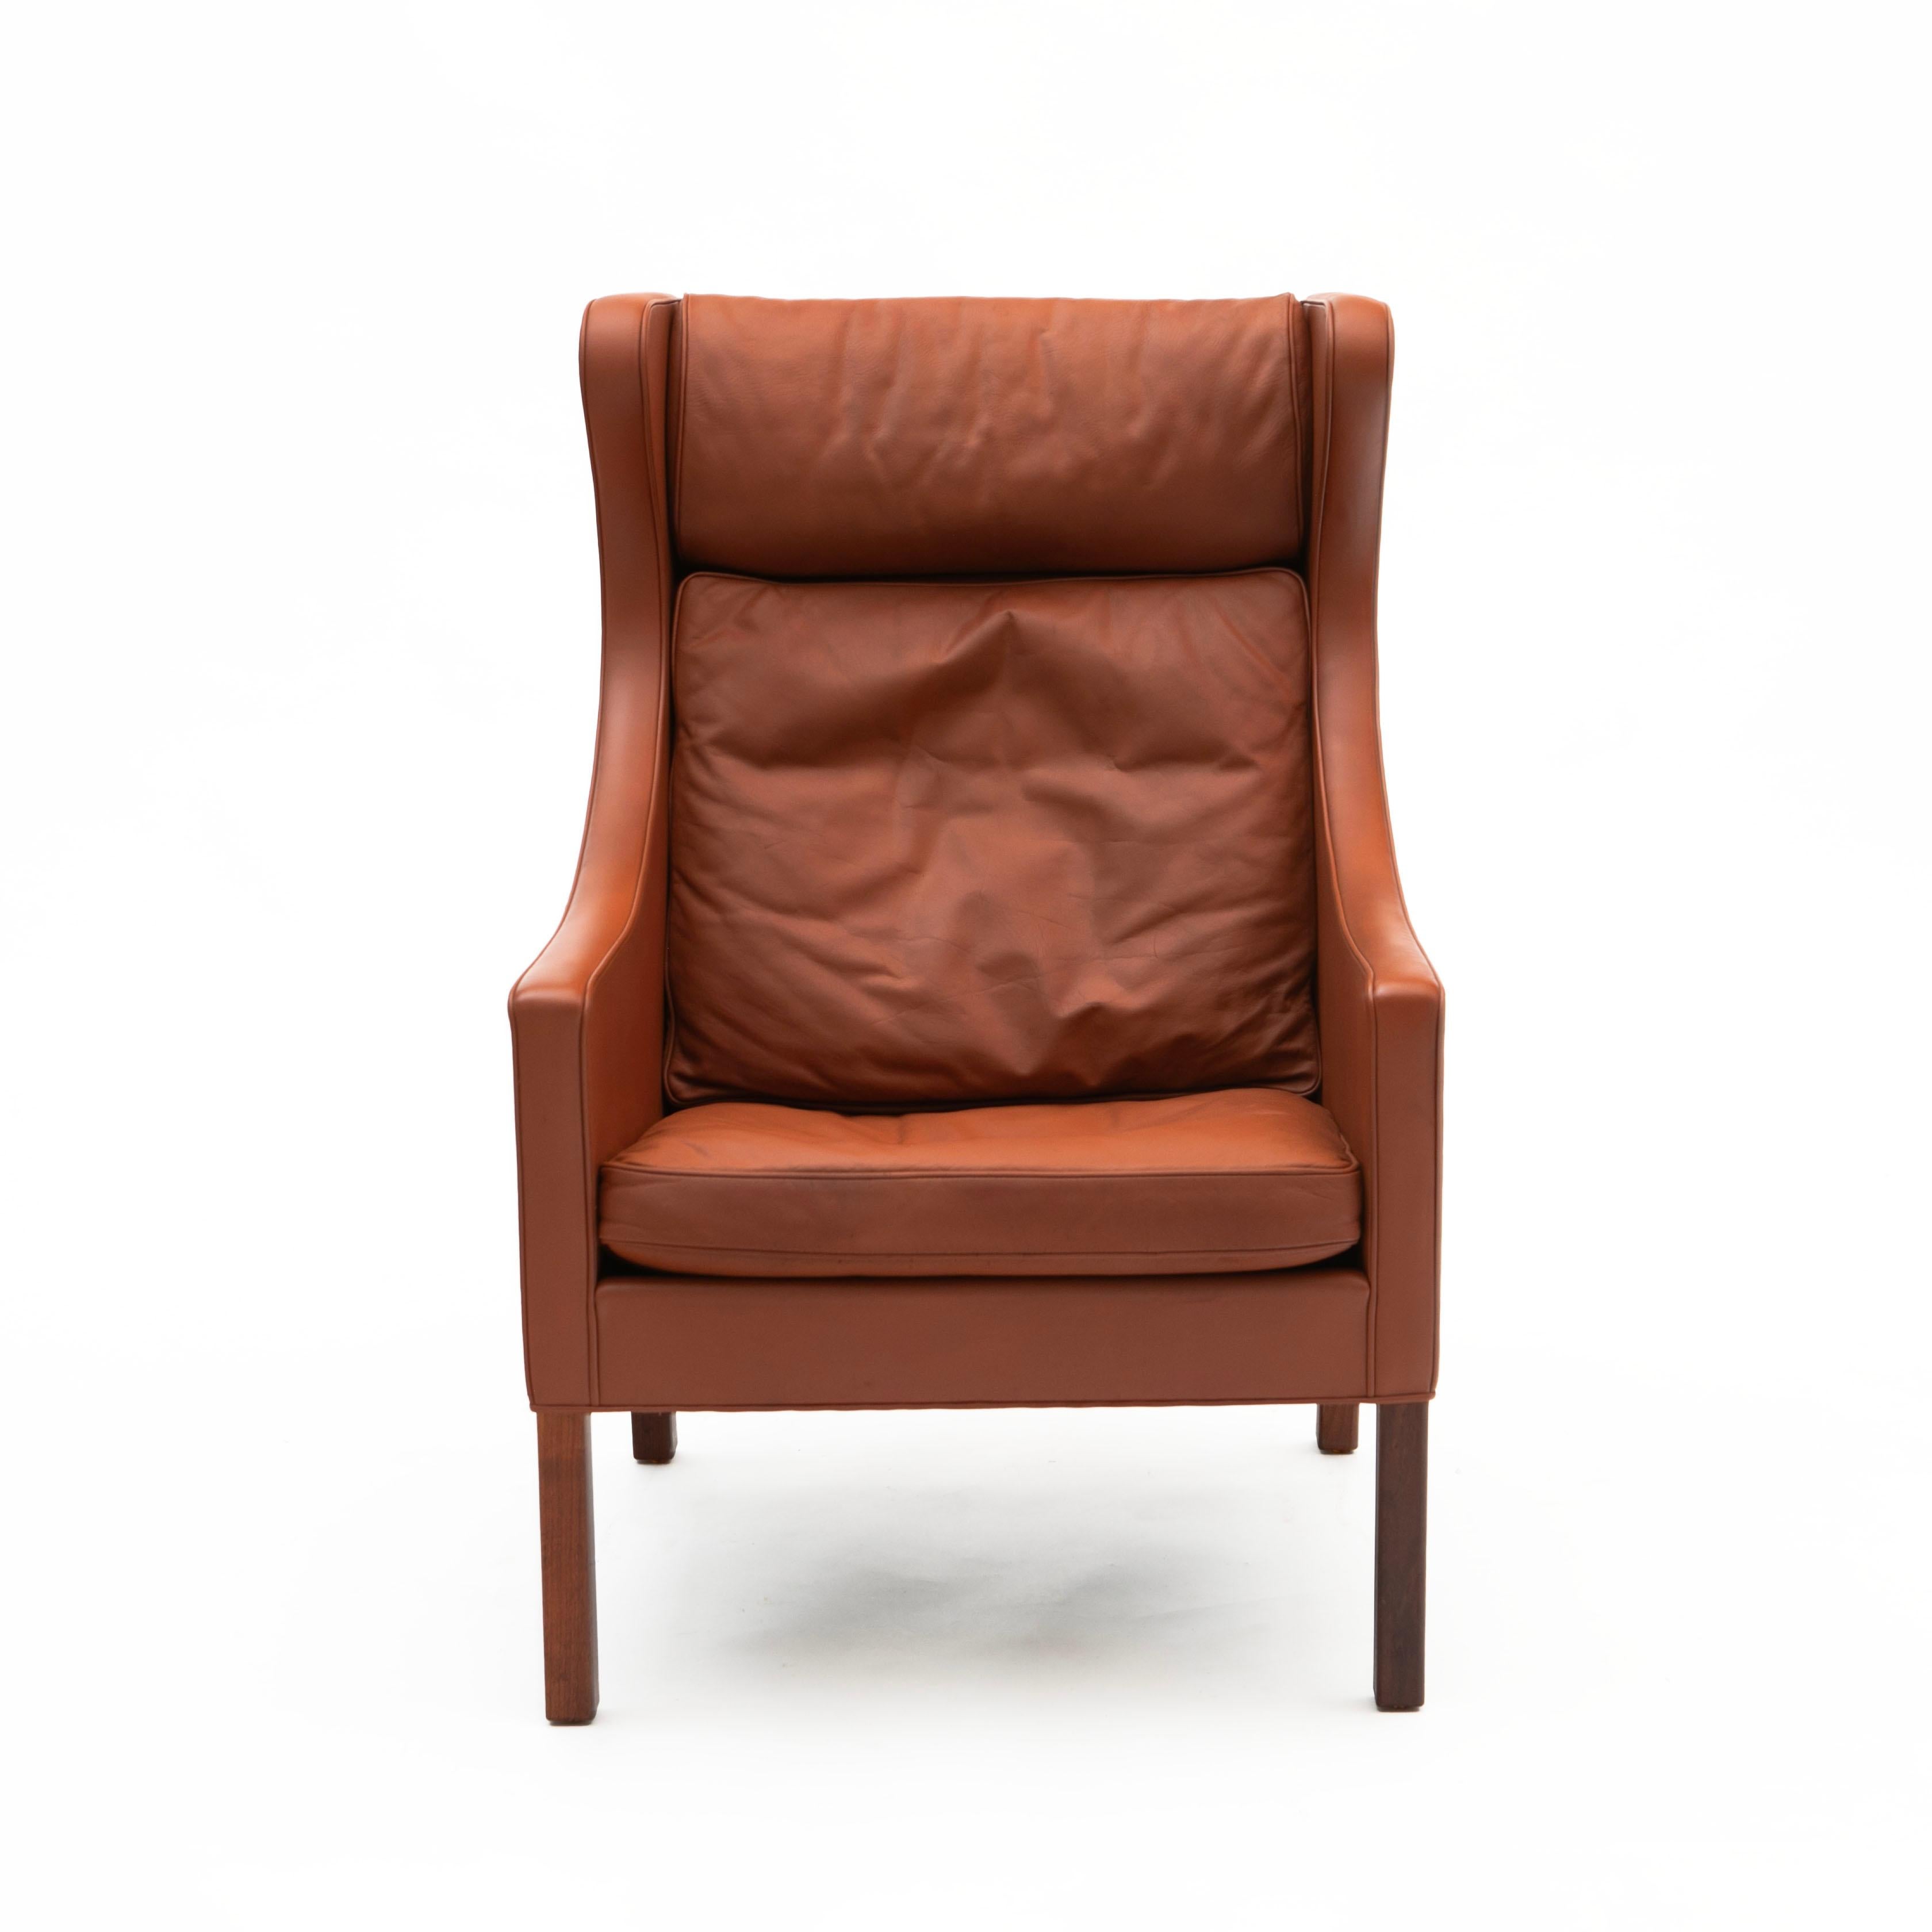 Børge Mogensen, Danish 1914-1972
High back wingchair in cognac colored leather and mahogany legs.

Designed by Børge Mogensen, manufactured by Fredericia in Denmark, 1960's. Model no. 2204/N2, serie no. 1175.

In very good original vintage